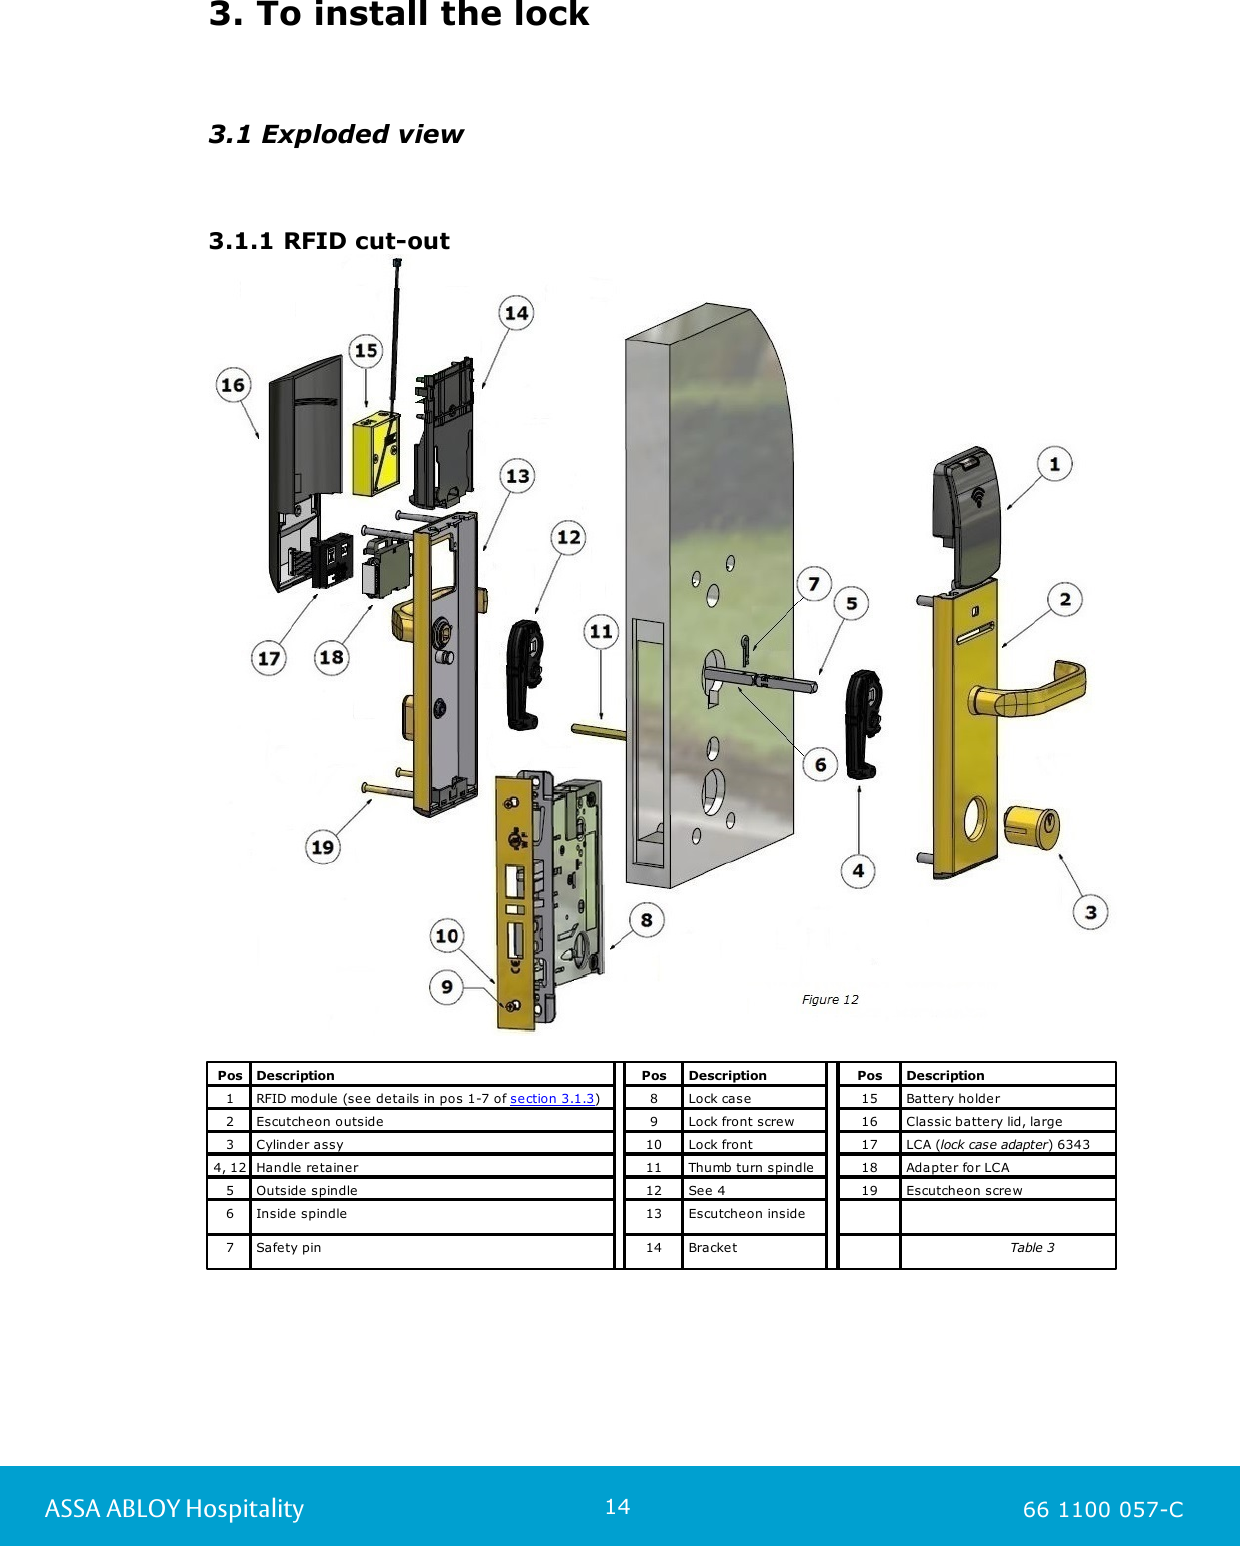 14ASSA ABLOY Hospitality 66 1100 057-C3. To install the lock3.1 Exploded view3.1.1 RFID cut-outPosDescriptionPosDescriptionPosDescription1RFID module (see details in pos 1-7 of section 3.1.3)8Lock case15Battery holder2Escutcheon outside9Lock front screw16Classic battery lid, large3Cylinder assy10Lock front17LCA (lock case adapter) 6343 4, 12Handle retainer11Thumb turn spindle18Adapter for LCA5Outside spindle12See 419Escutcheon screw6Inside spindle 13Escutcheon inside7Safety pin14Bracket                         Table 3